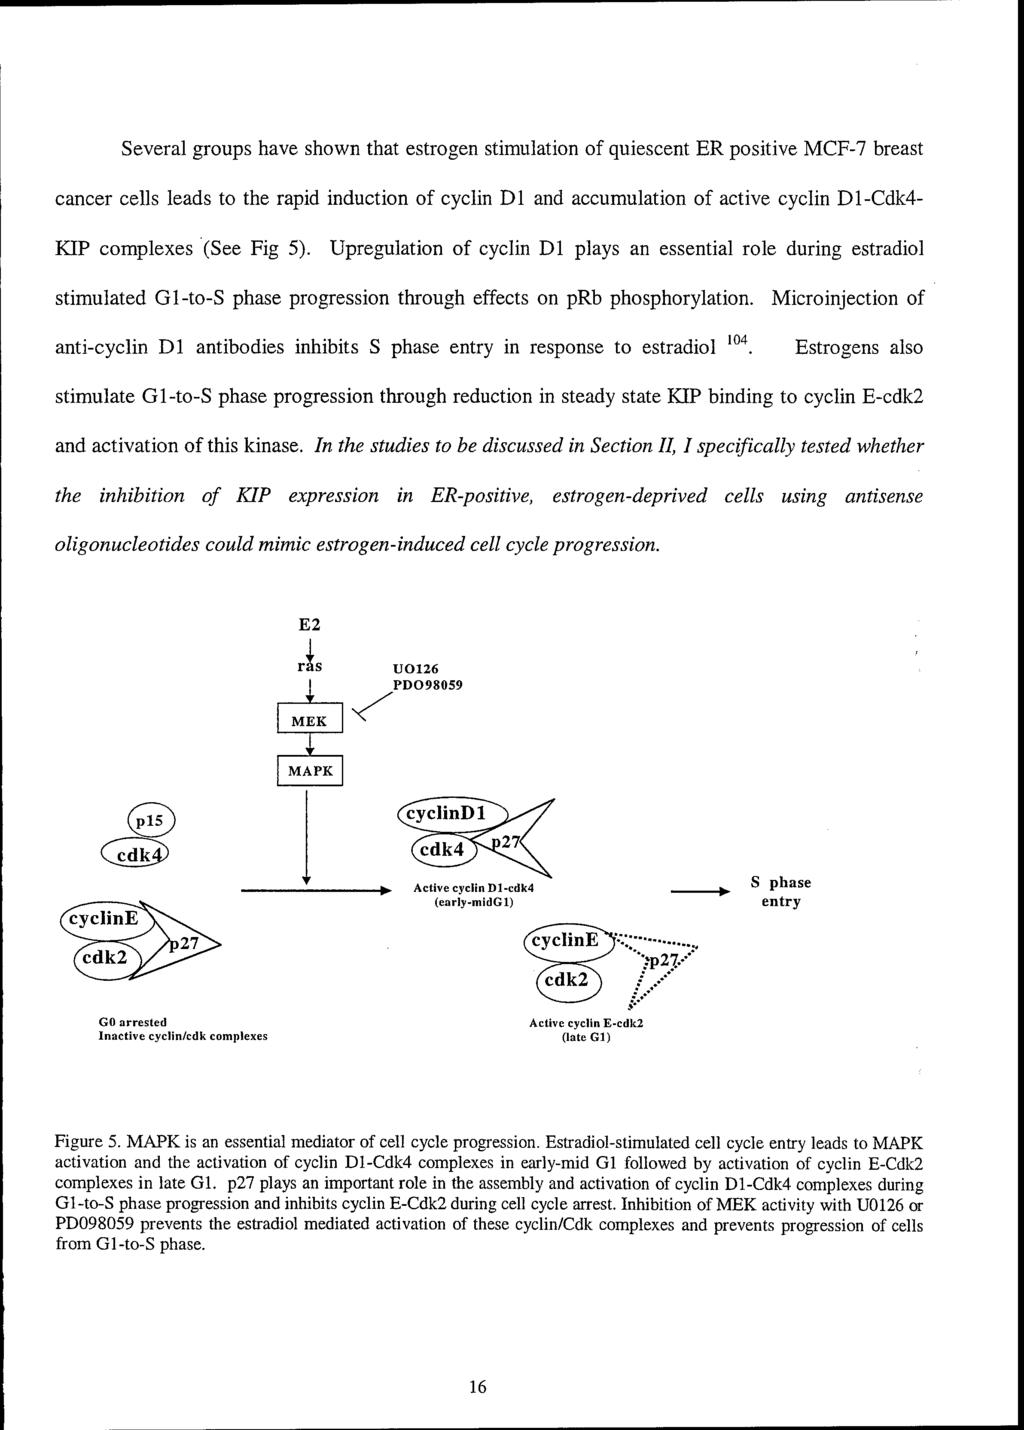 Several groups have shown that estrogen stimulation of quiescent ER positive MCF-7 breast cancer cells leads to the rapid induction of cyclin Dl and accumulation of active cyclin Dl-Cdk4- KIP